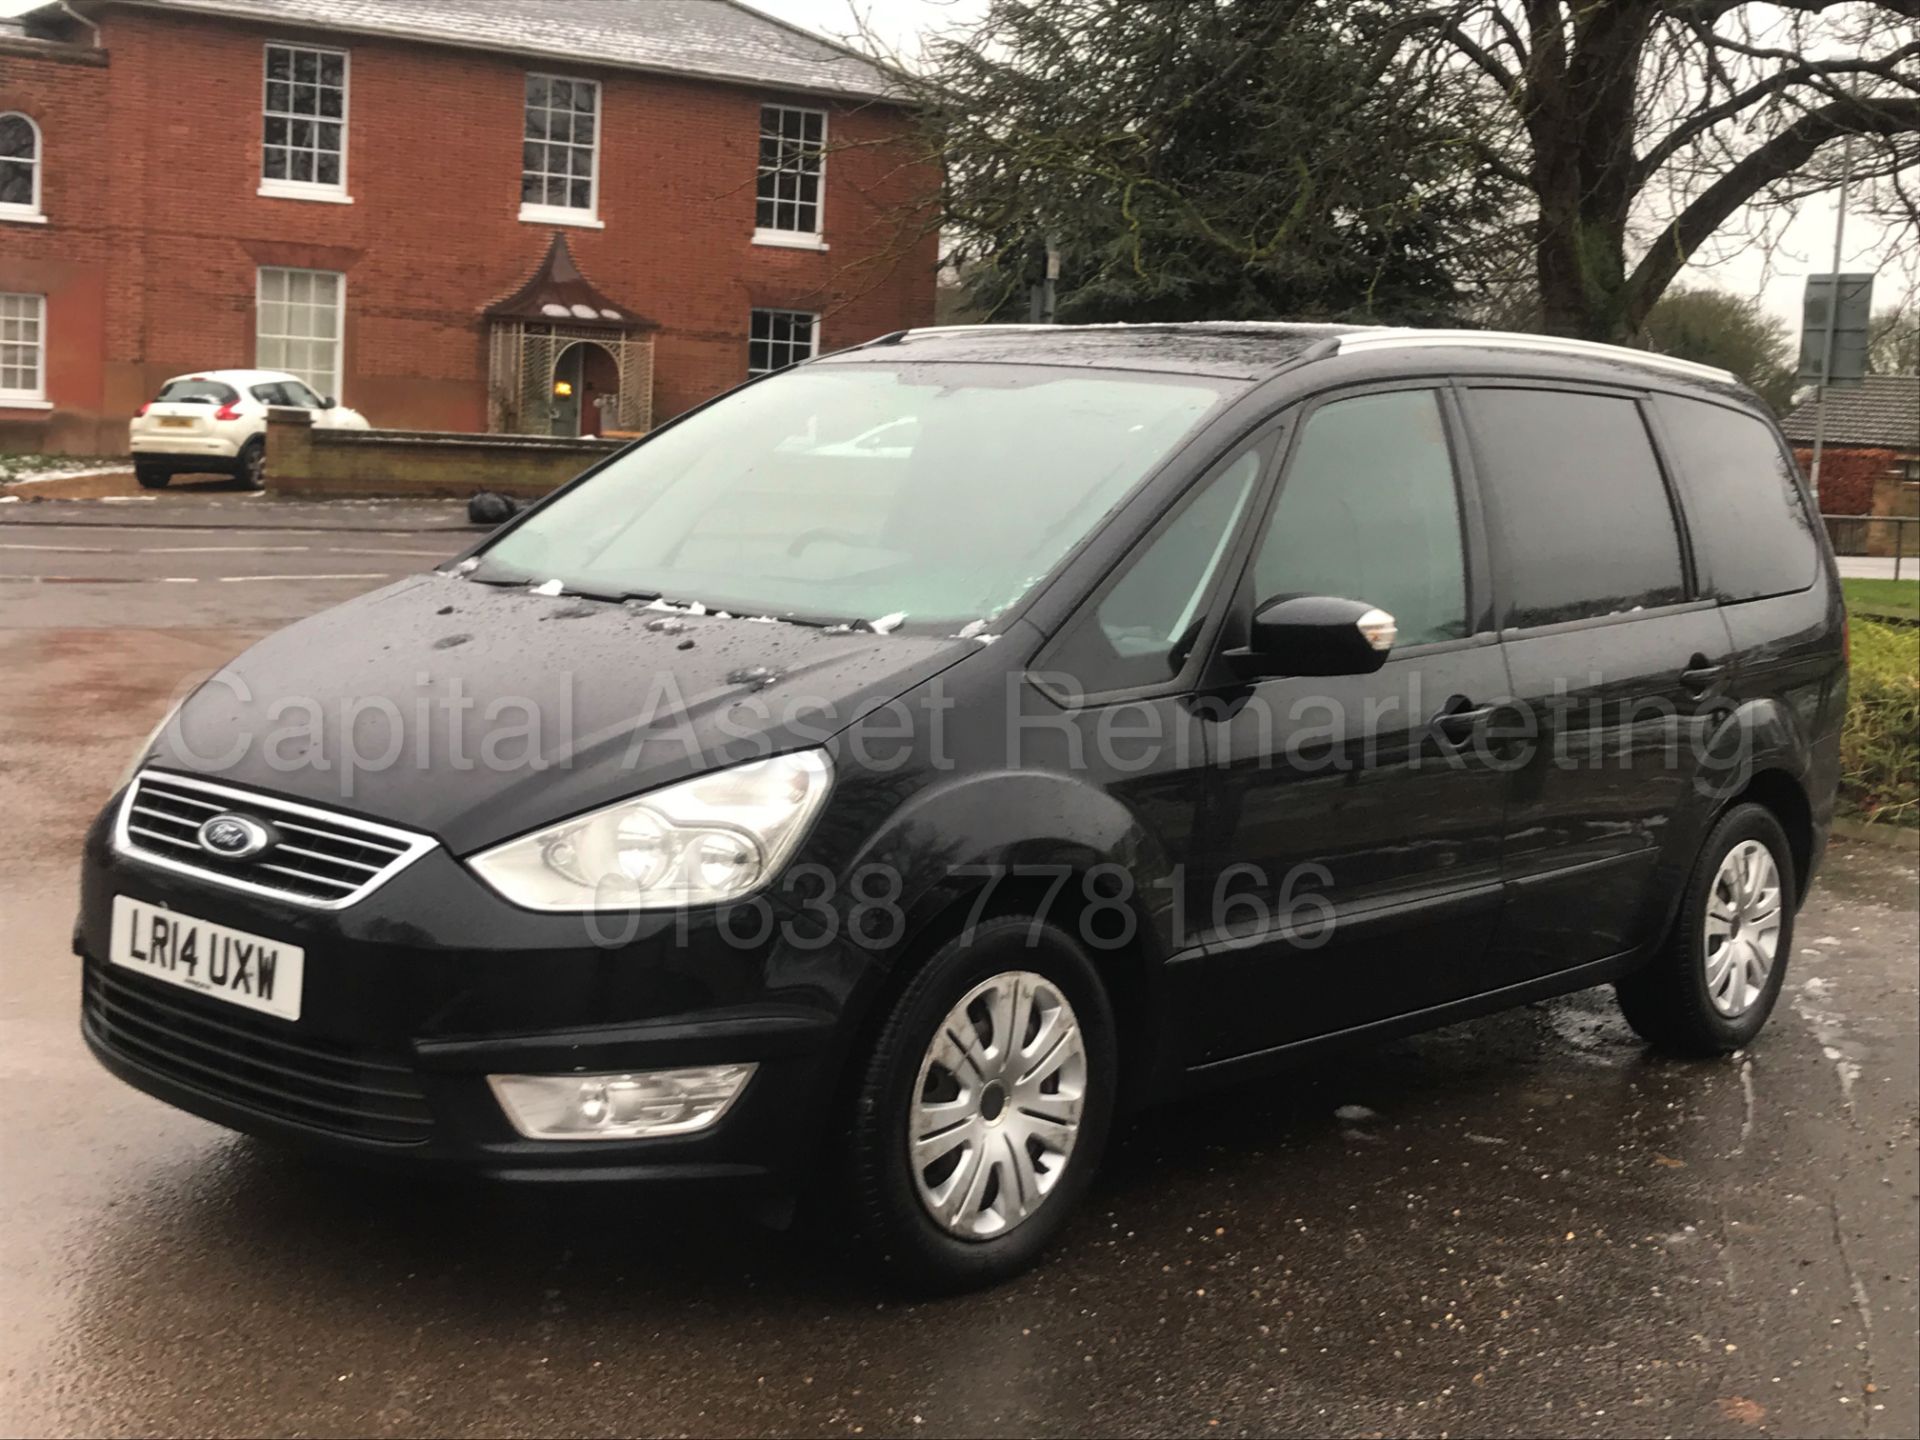 (On Sale) FORD GALAXY 'ZETEC' 7 SEATER (2014 - 14 REG) 2.0 TDCI - 140 BHP - POWER SHIFT (1 OWNER) - Image 5 of 30